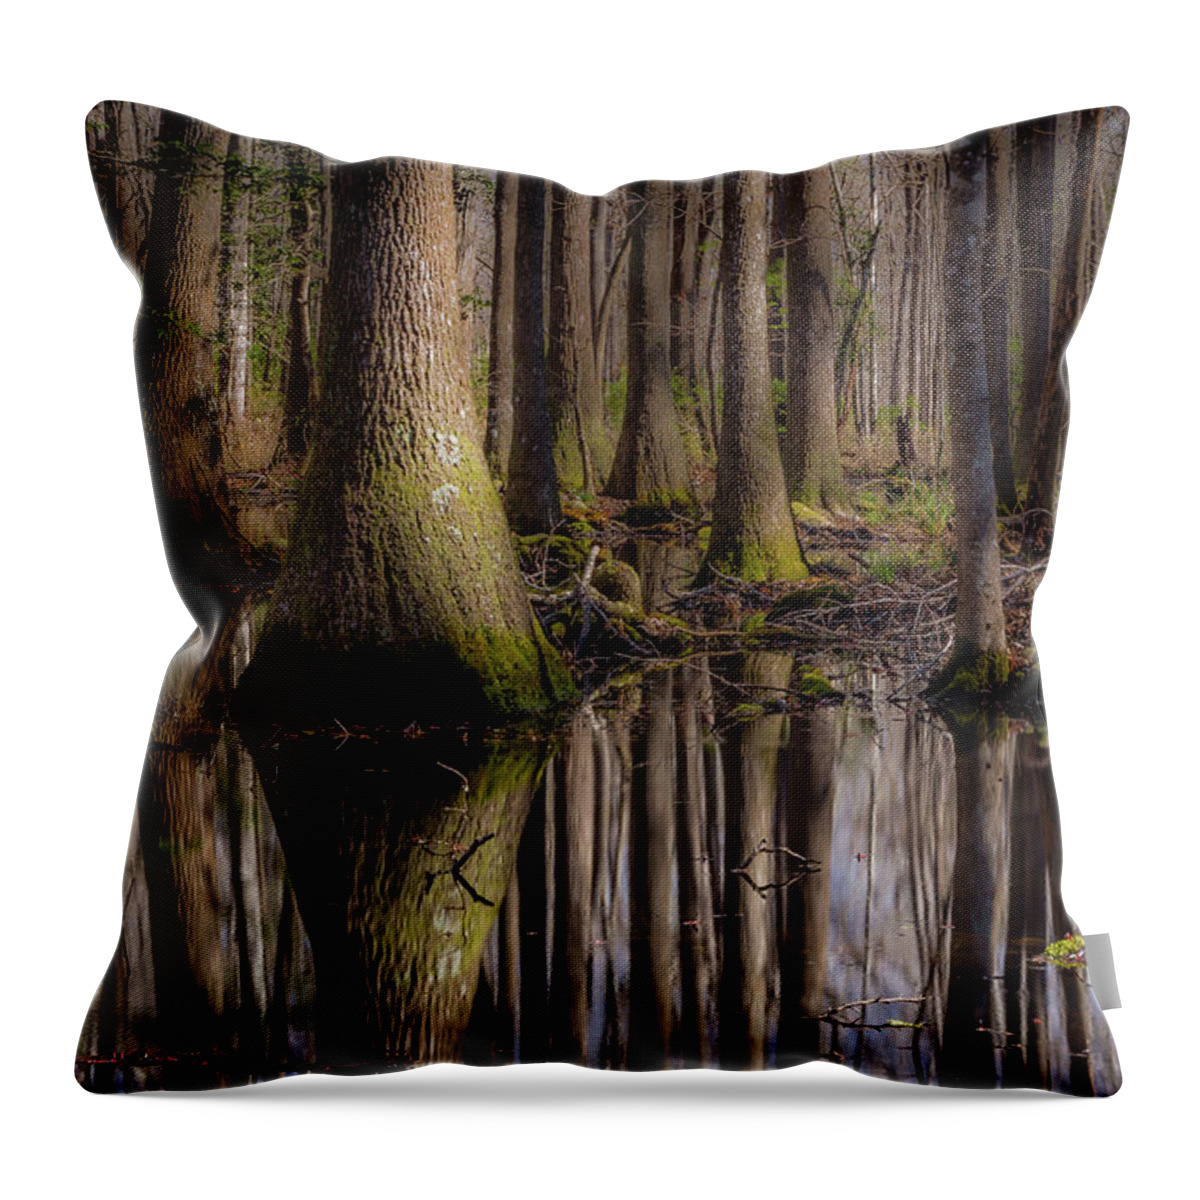 Art Throw Pillow featuring the photograph Green Pond by Gary Migues